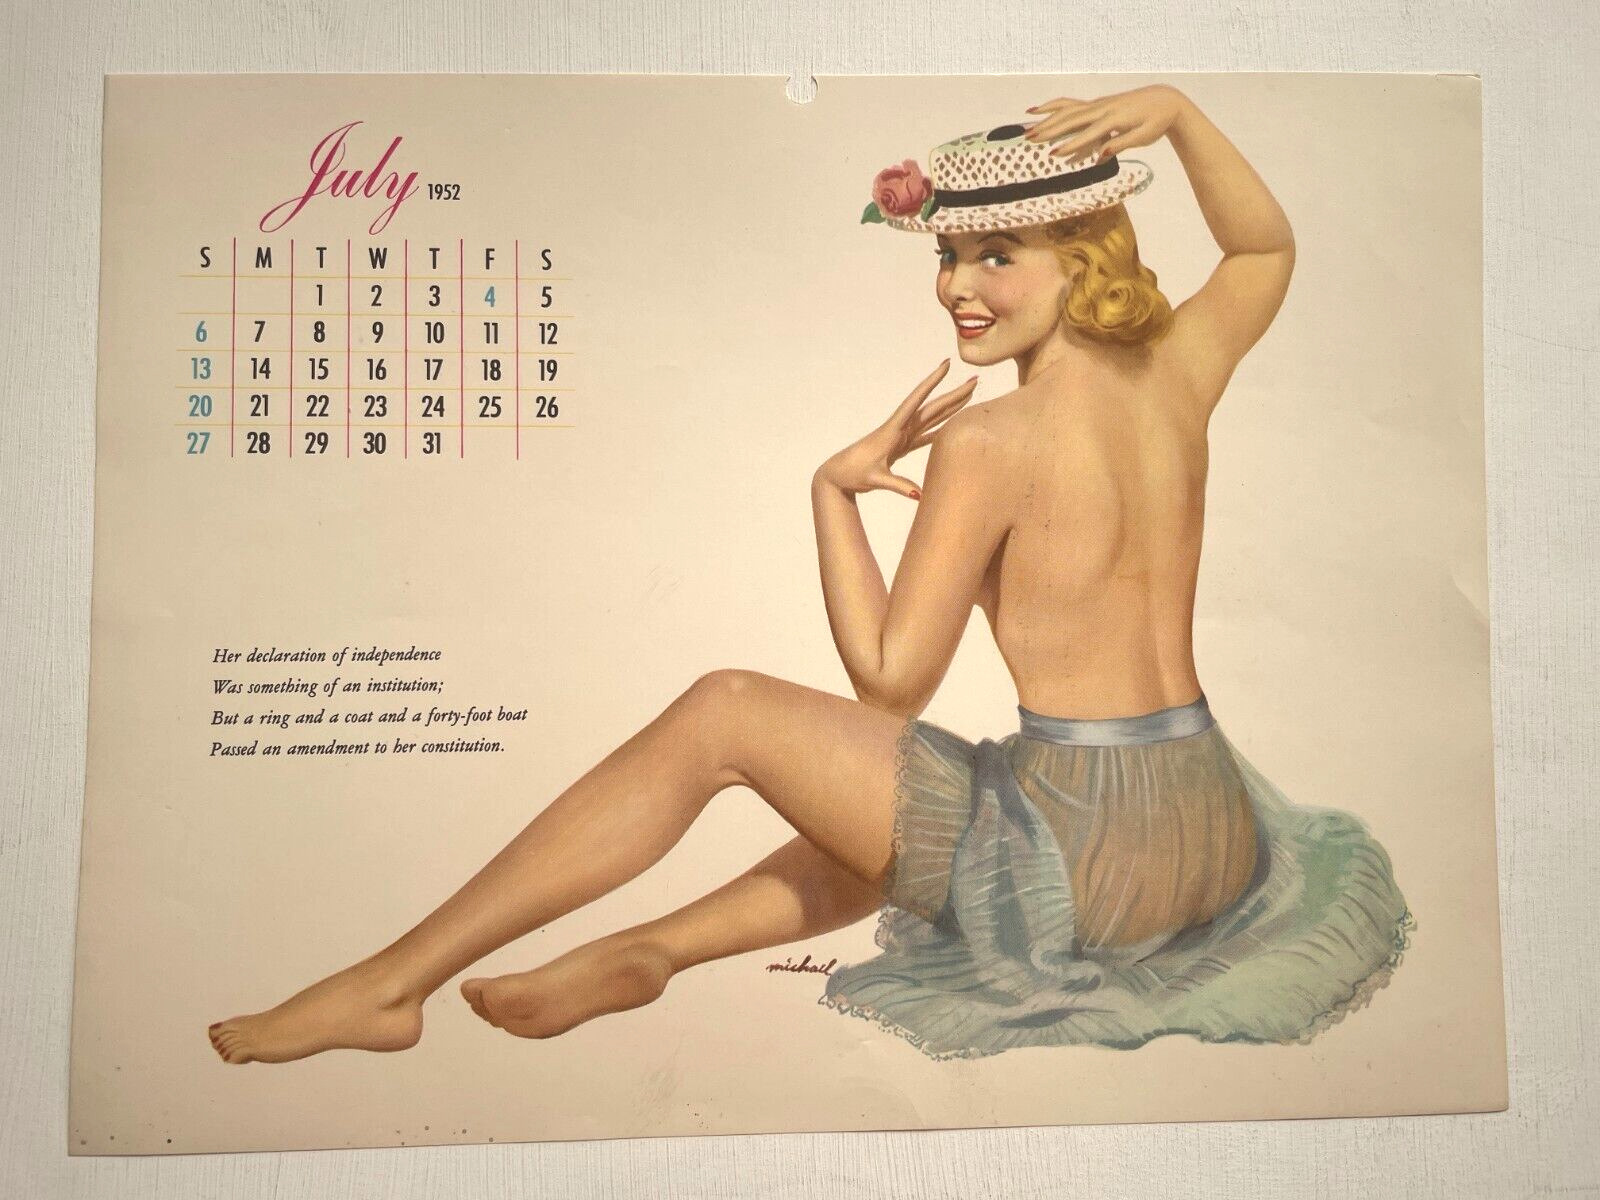 Vintage July 1952 Esquire Magazine Pinup Girl Calendar Page by Michael Silver